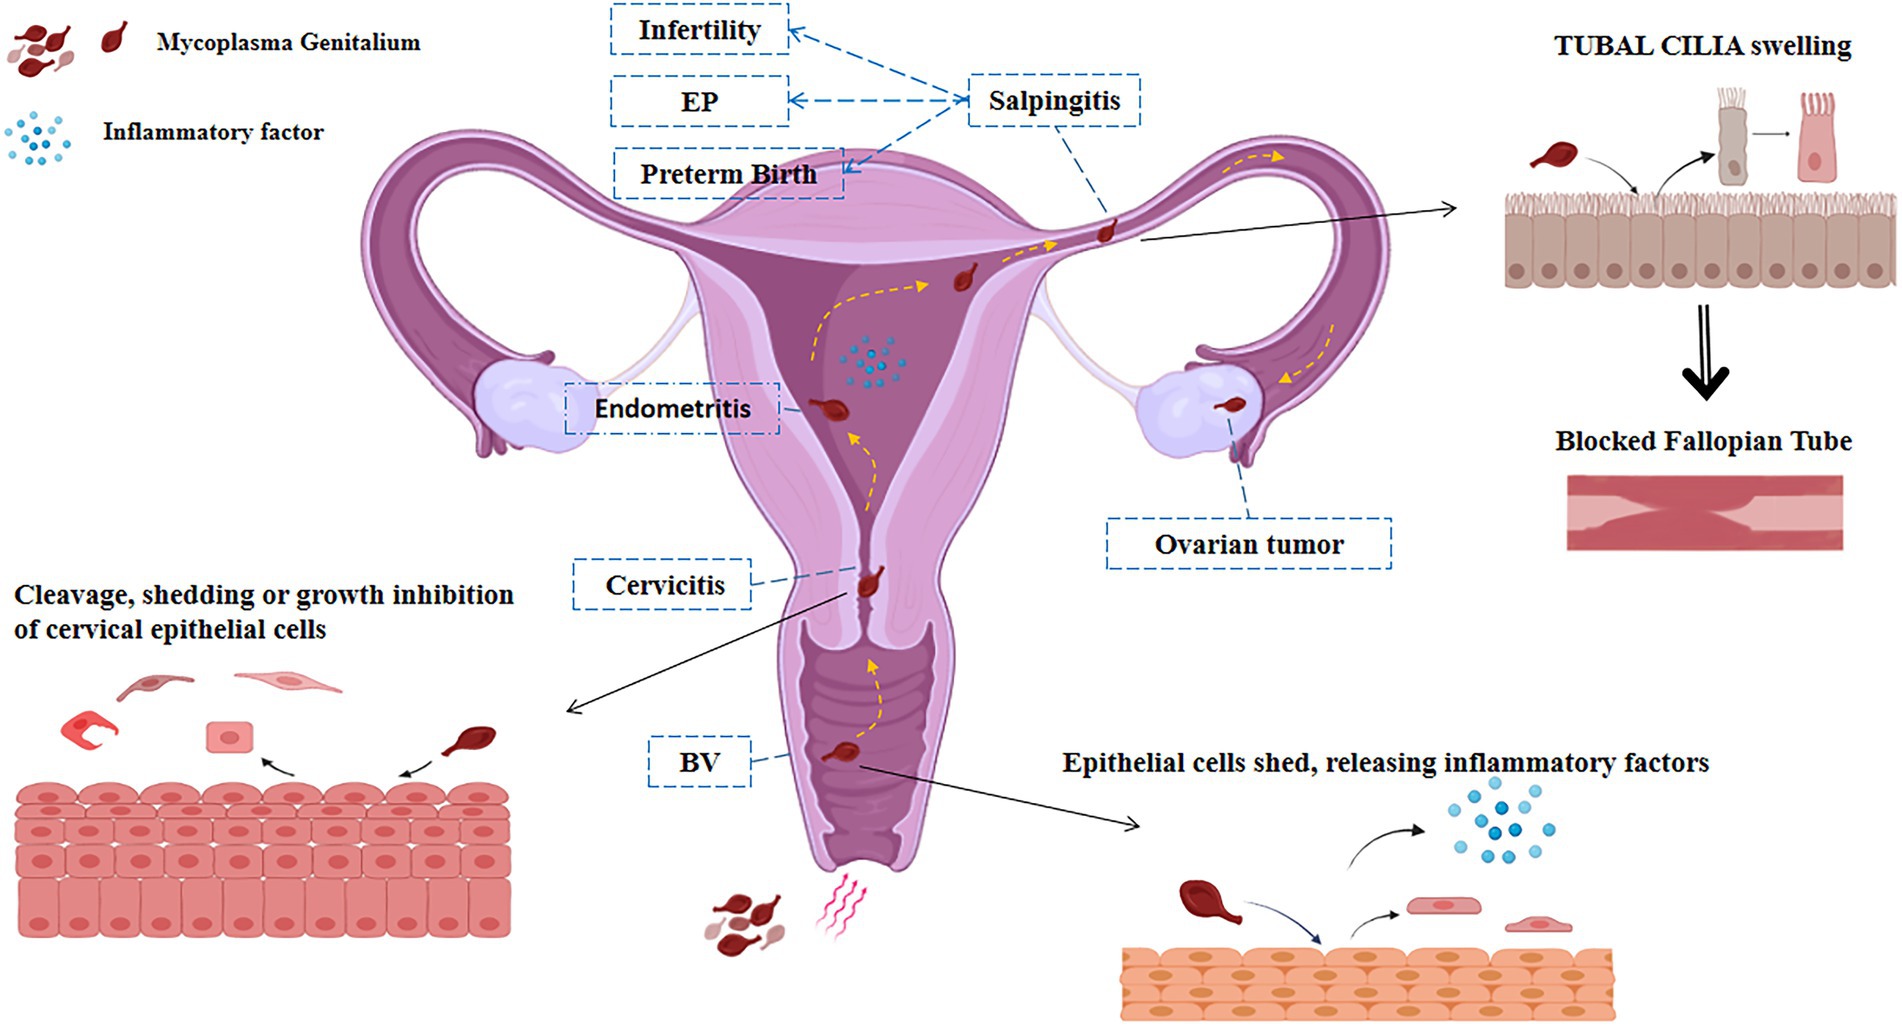 Frontiers Mycoplasma genitalium infection in the female reproductive system Diseases and treatment image